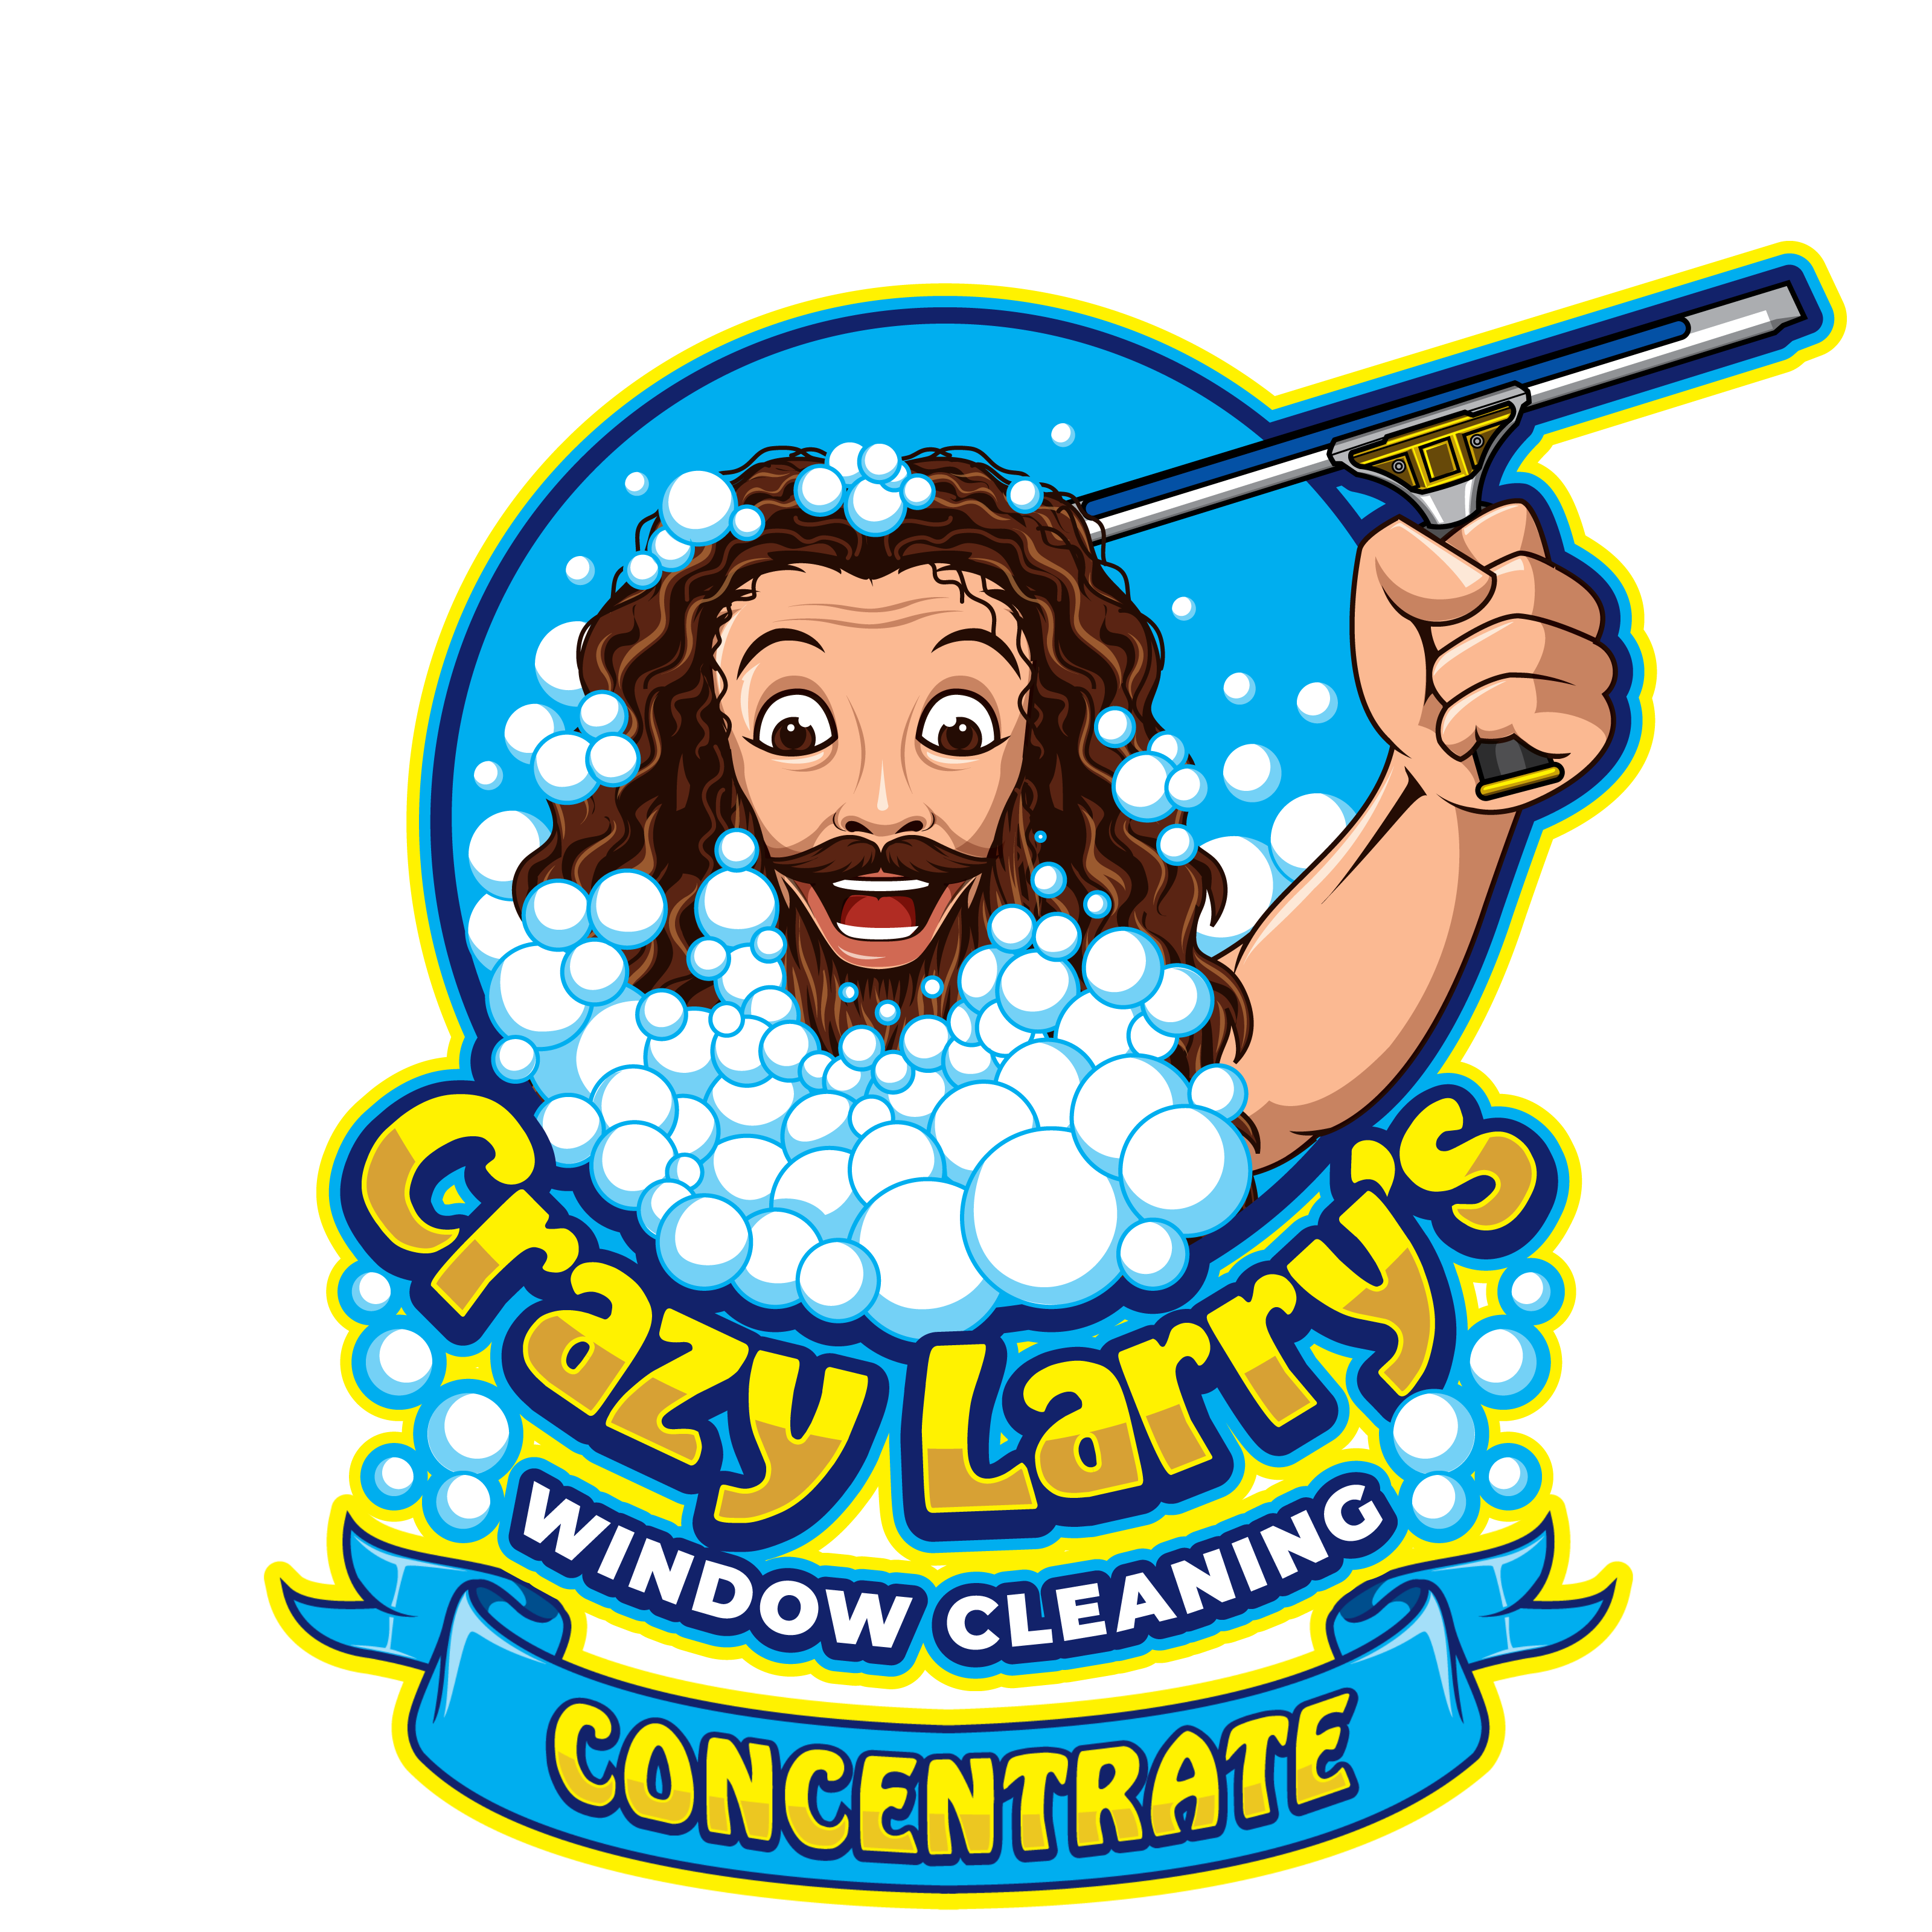 Crazy Larry's Window Washing Concentrate